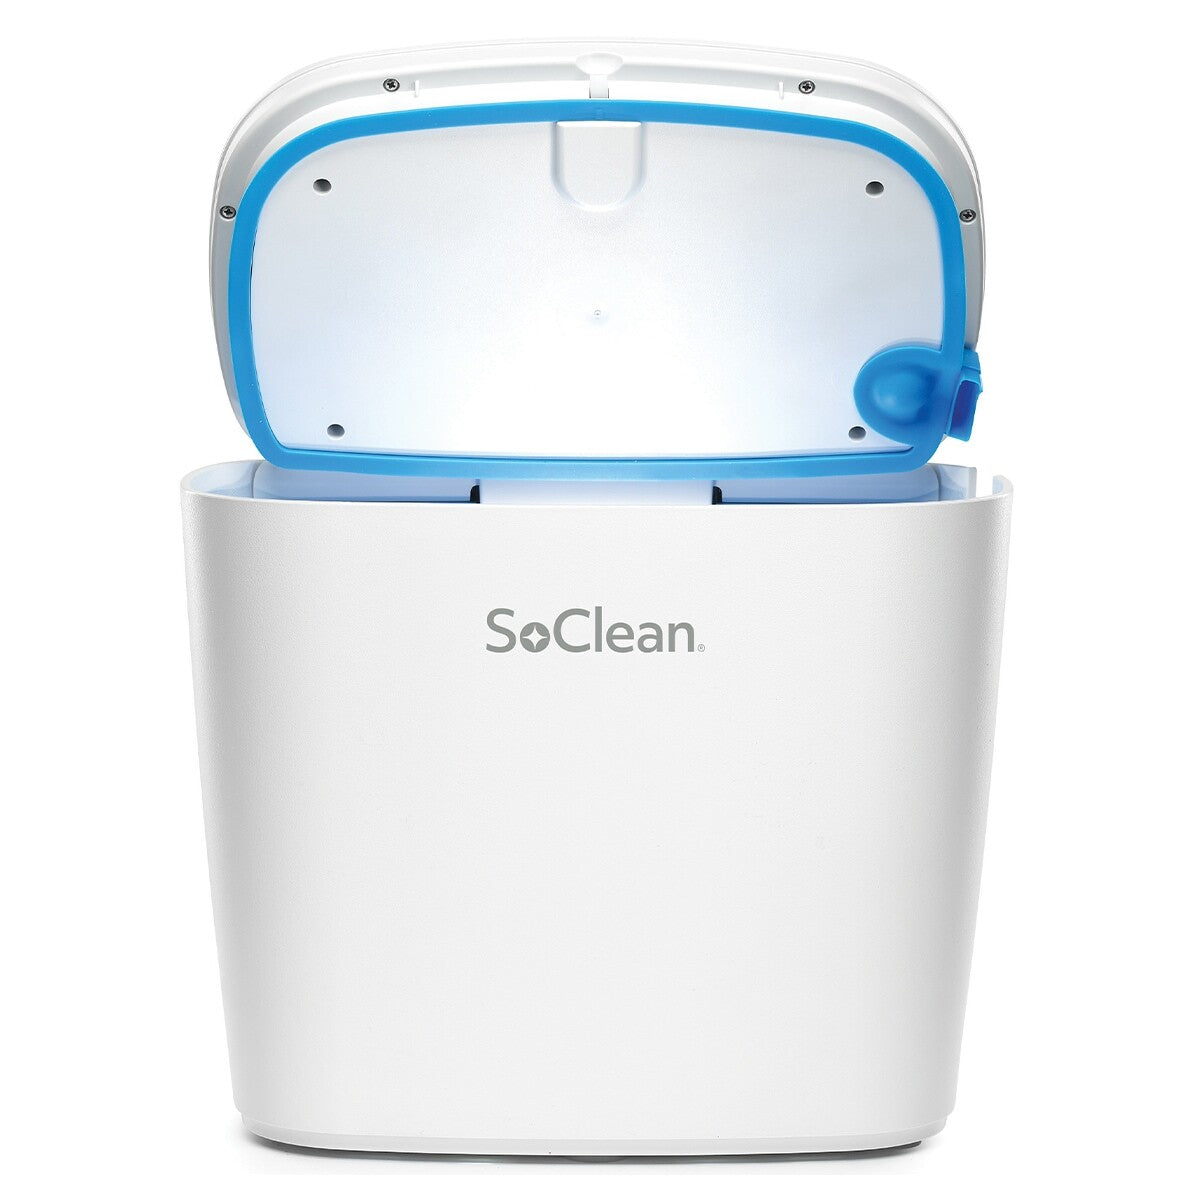 SoClean 3 CPAP/BiPAP Cleaner & Sanitizer (Includes Tubing Adapter)